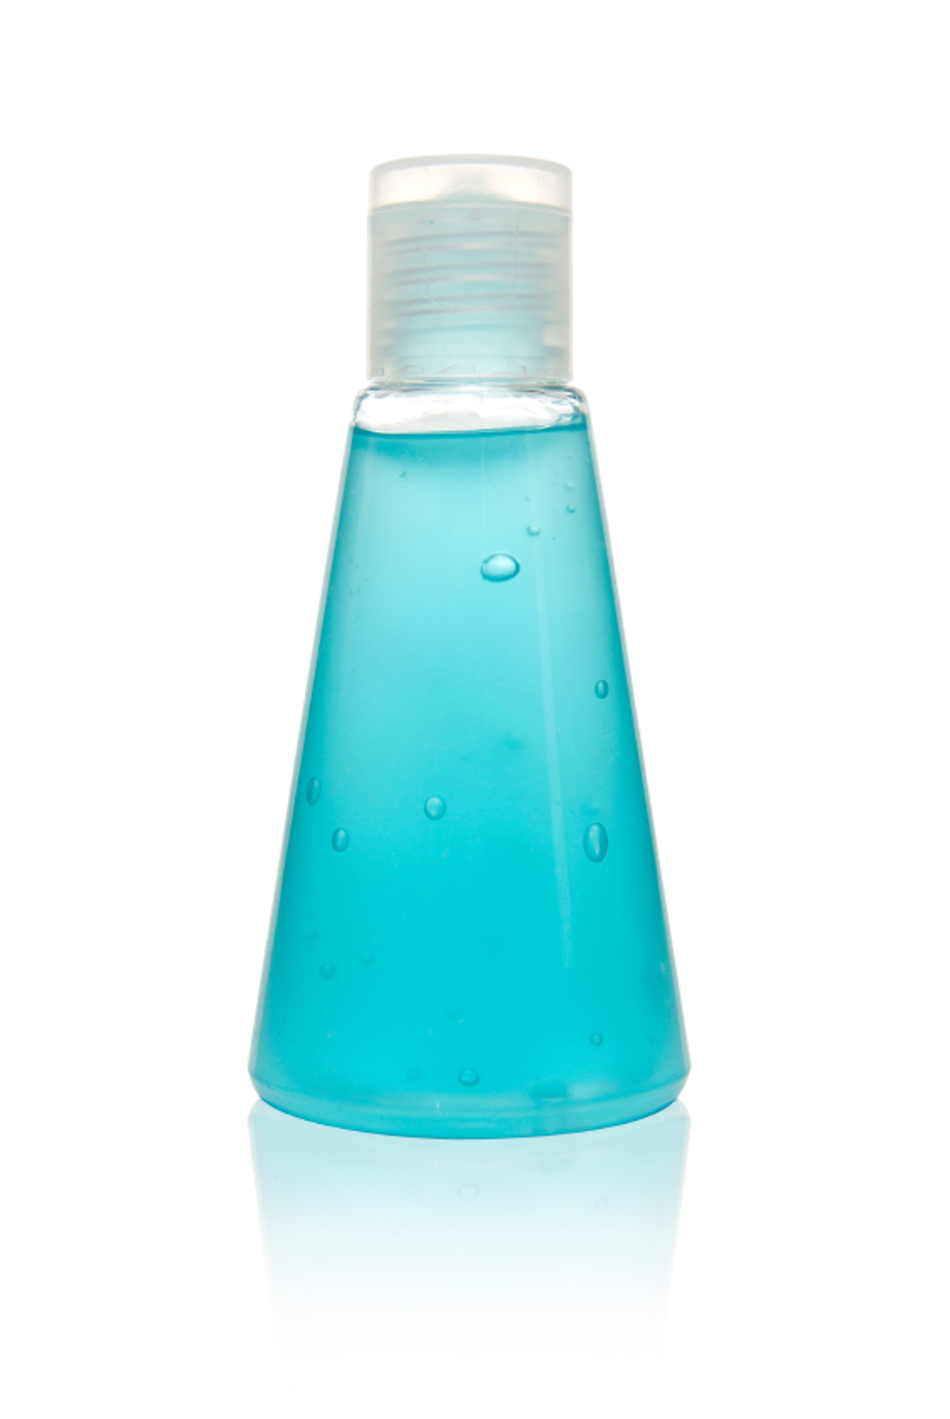 Those Colorful and Yummy-Smelling Hand Sanitizers Are Dangerous for Your Kids